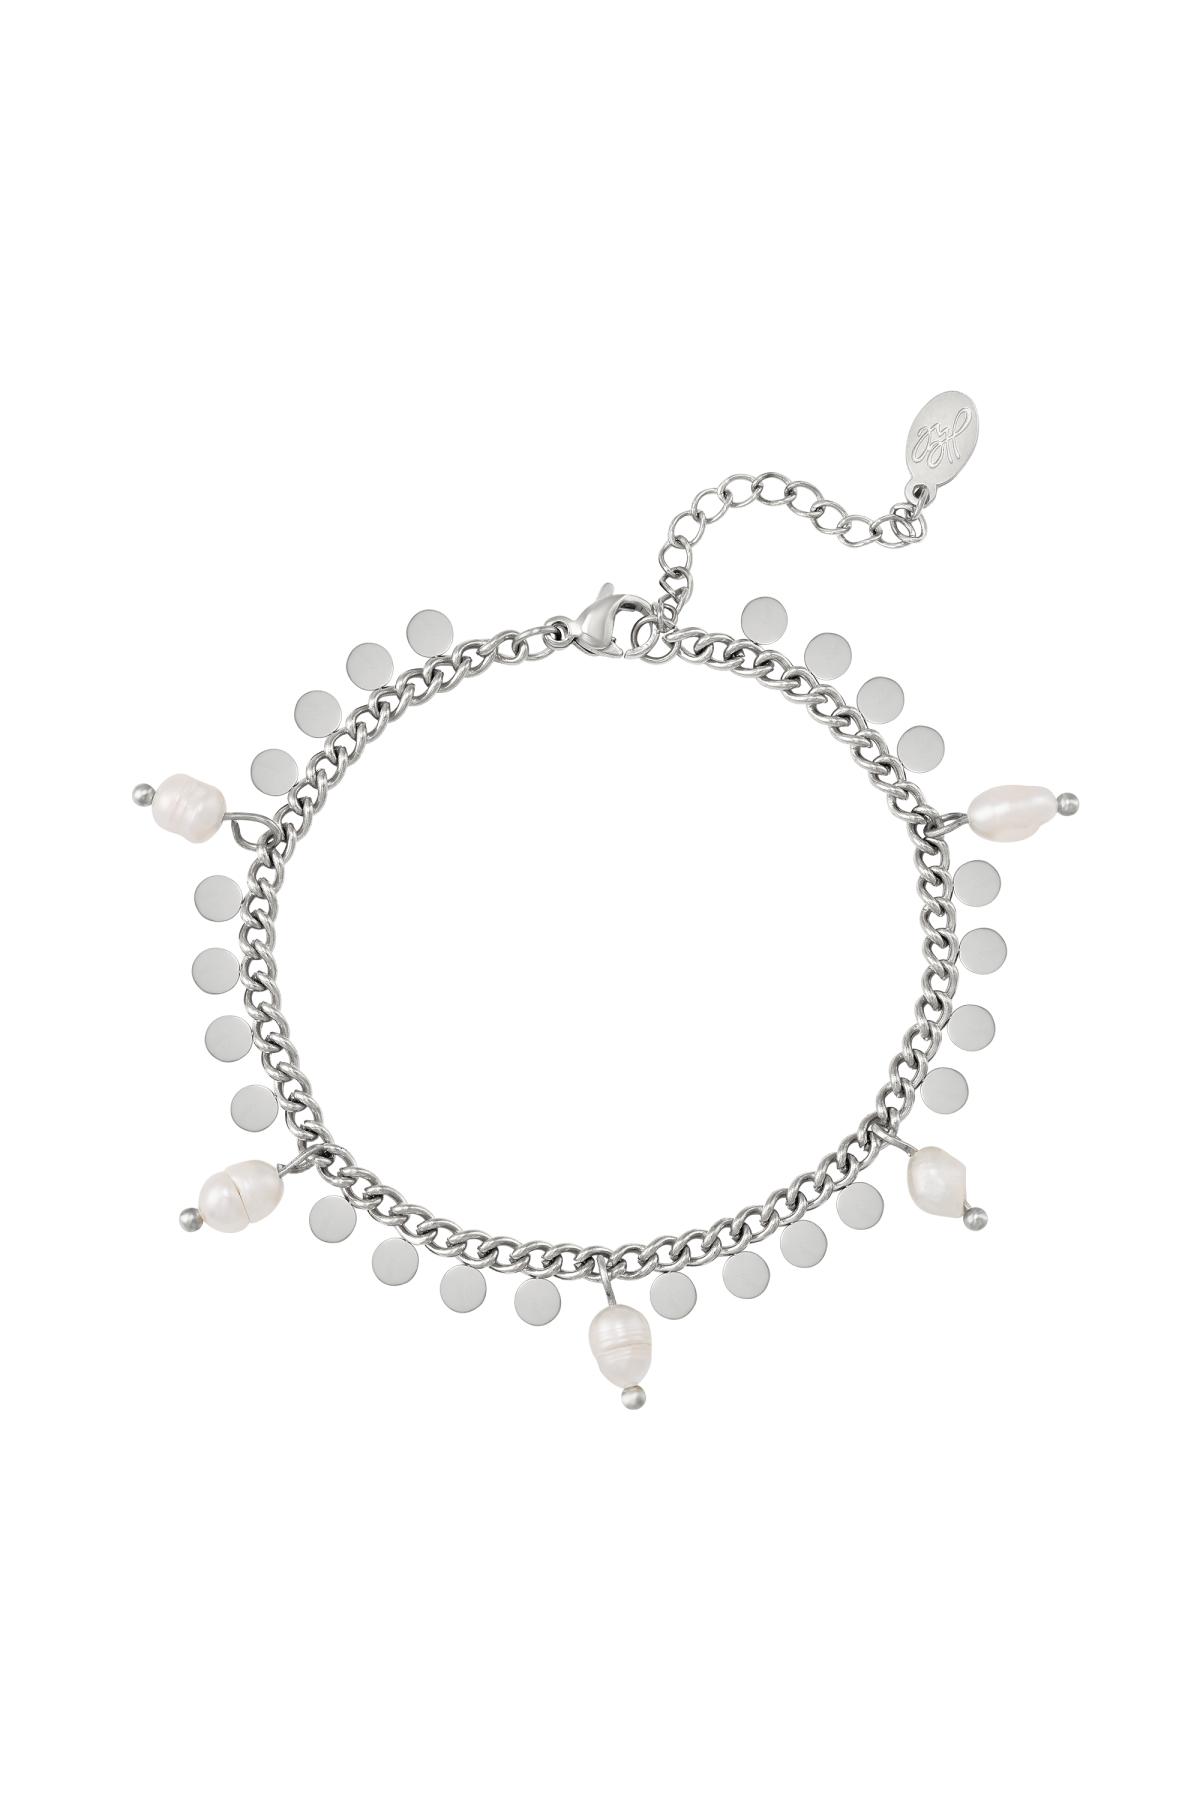 Bracelet with pearls and circles Silver Stainless Steel h5 